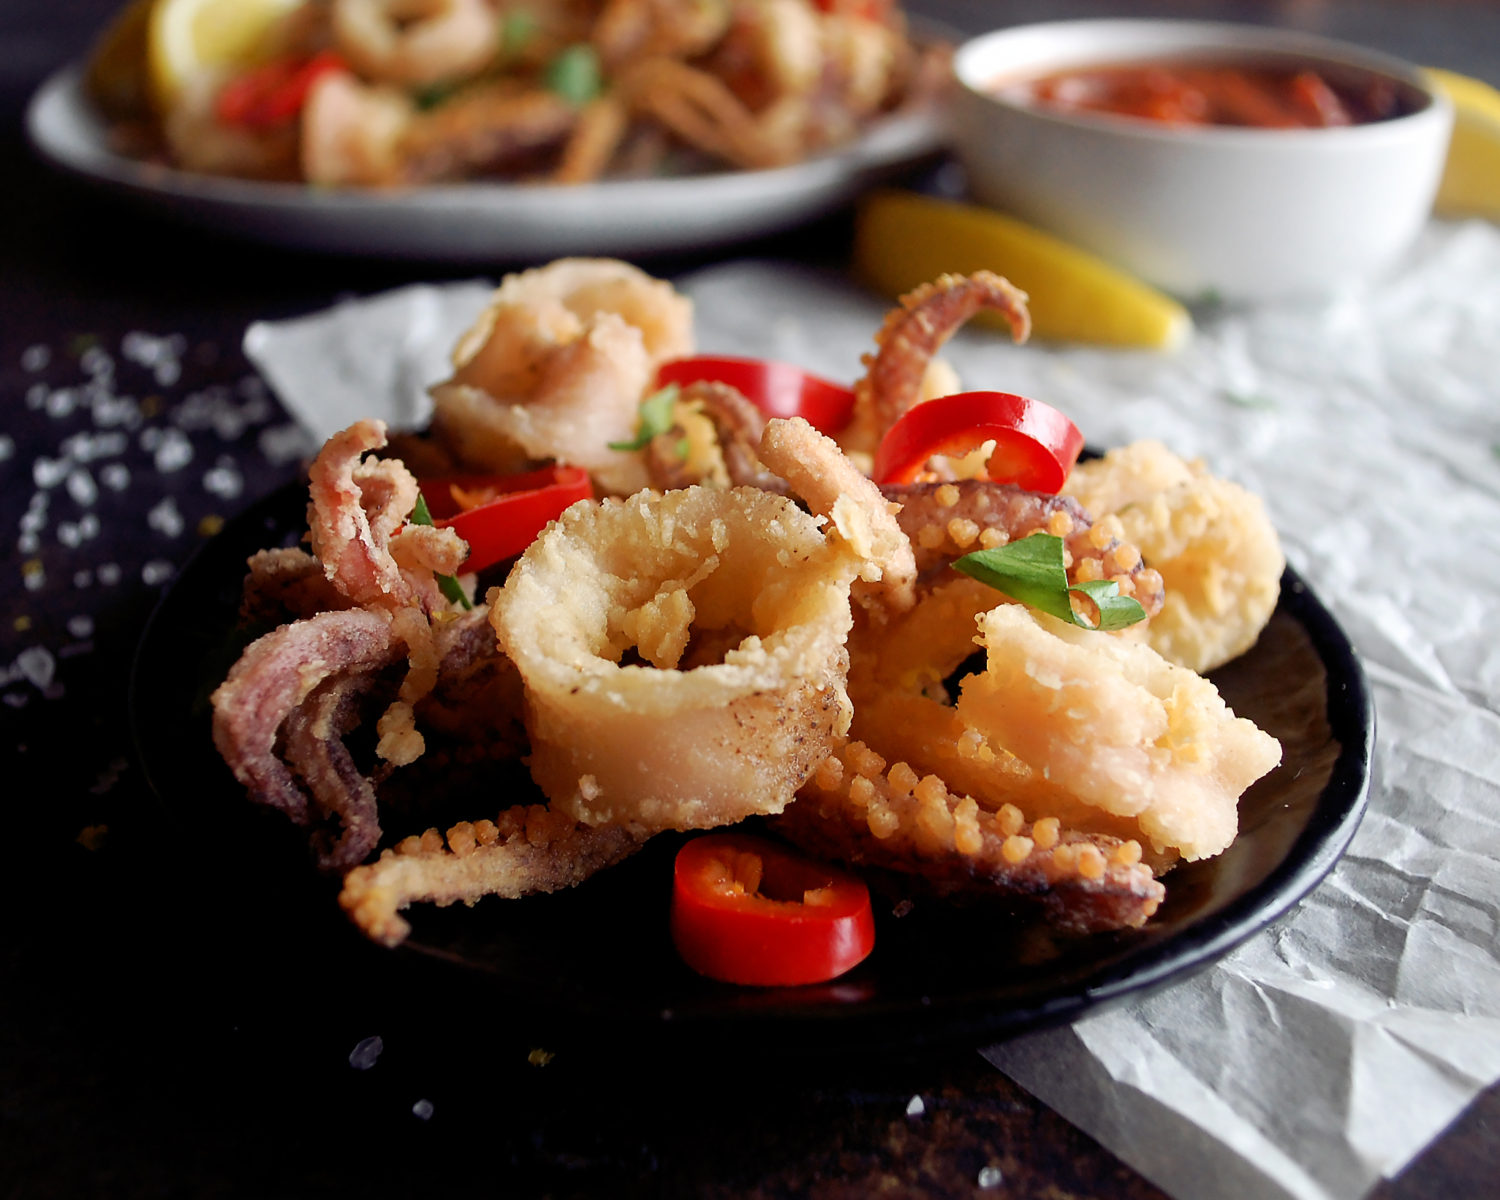 Fried Calamari with Pickled Red Fresno Chili Peppers - The Original Dish